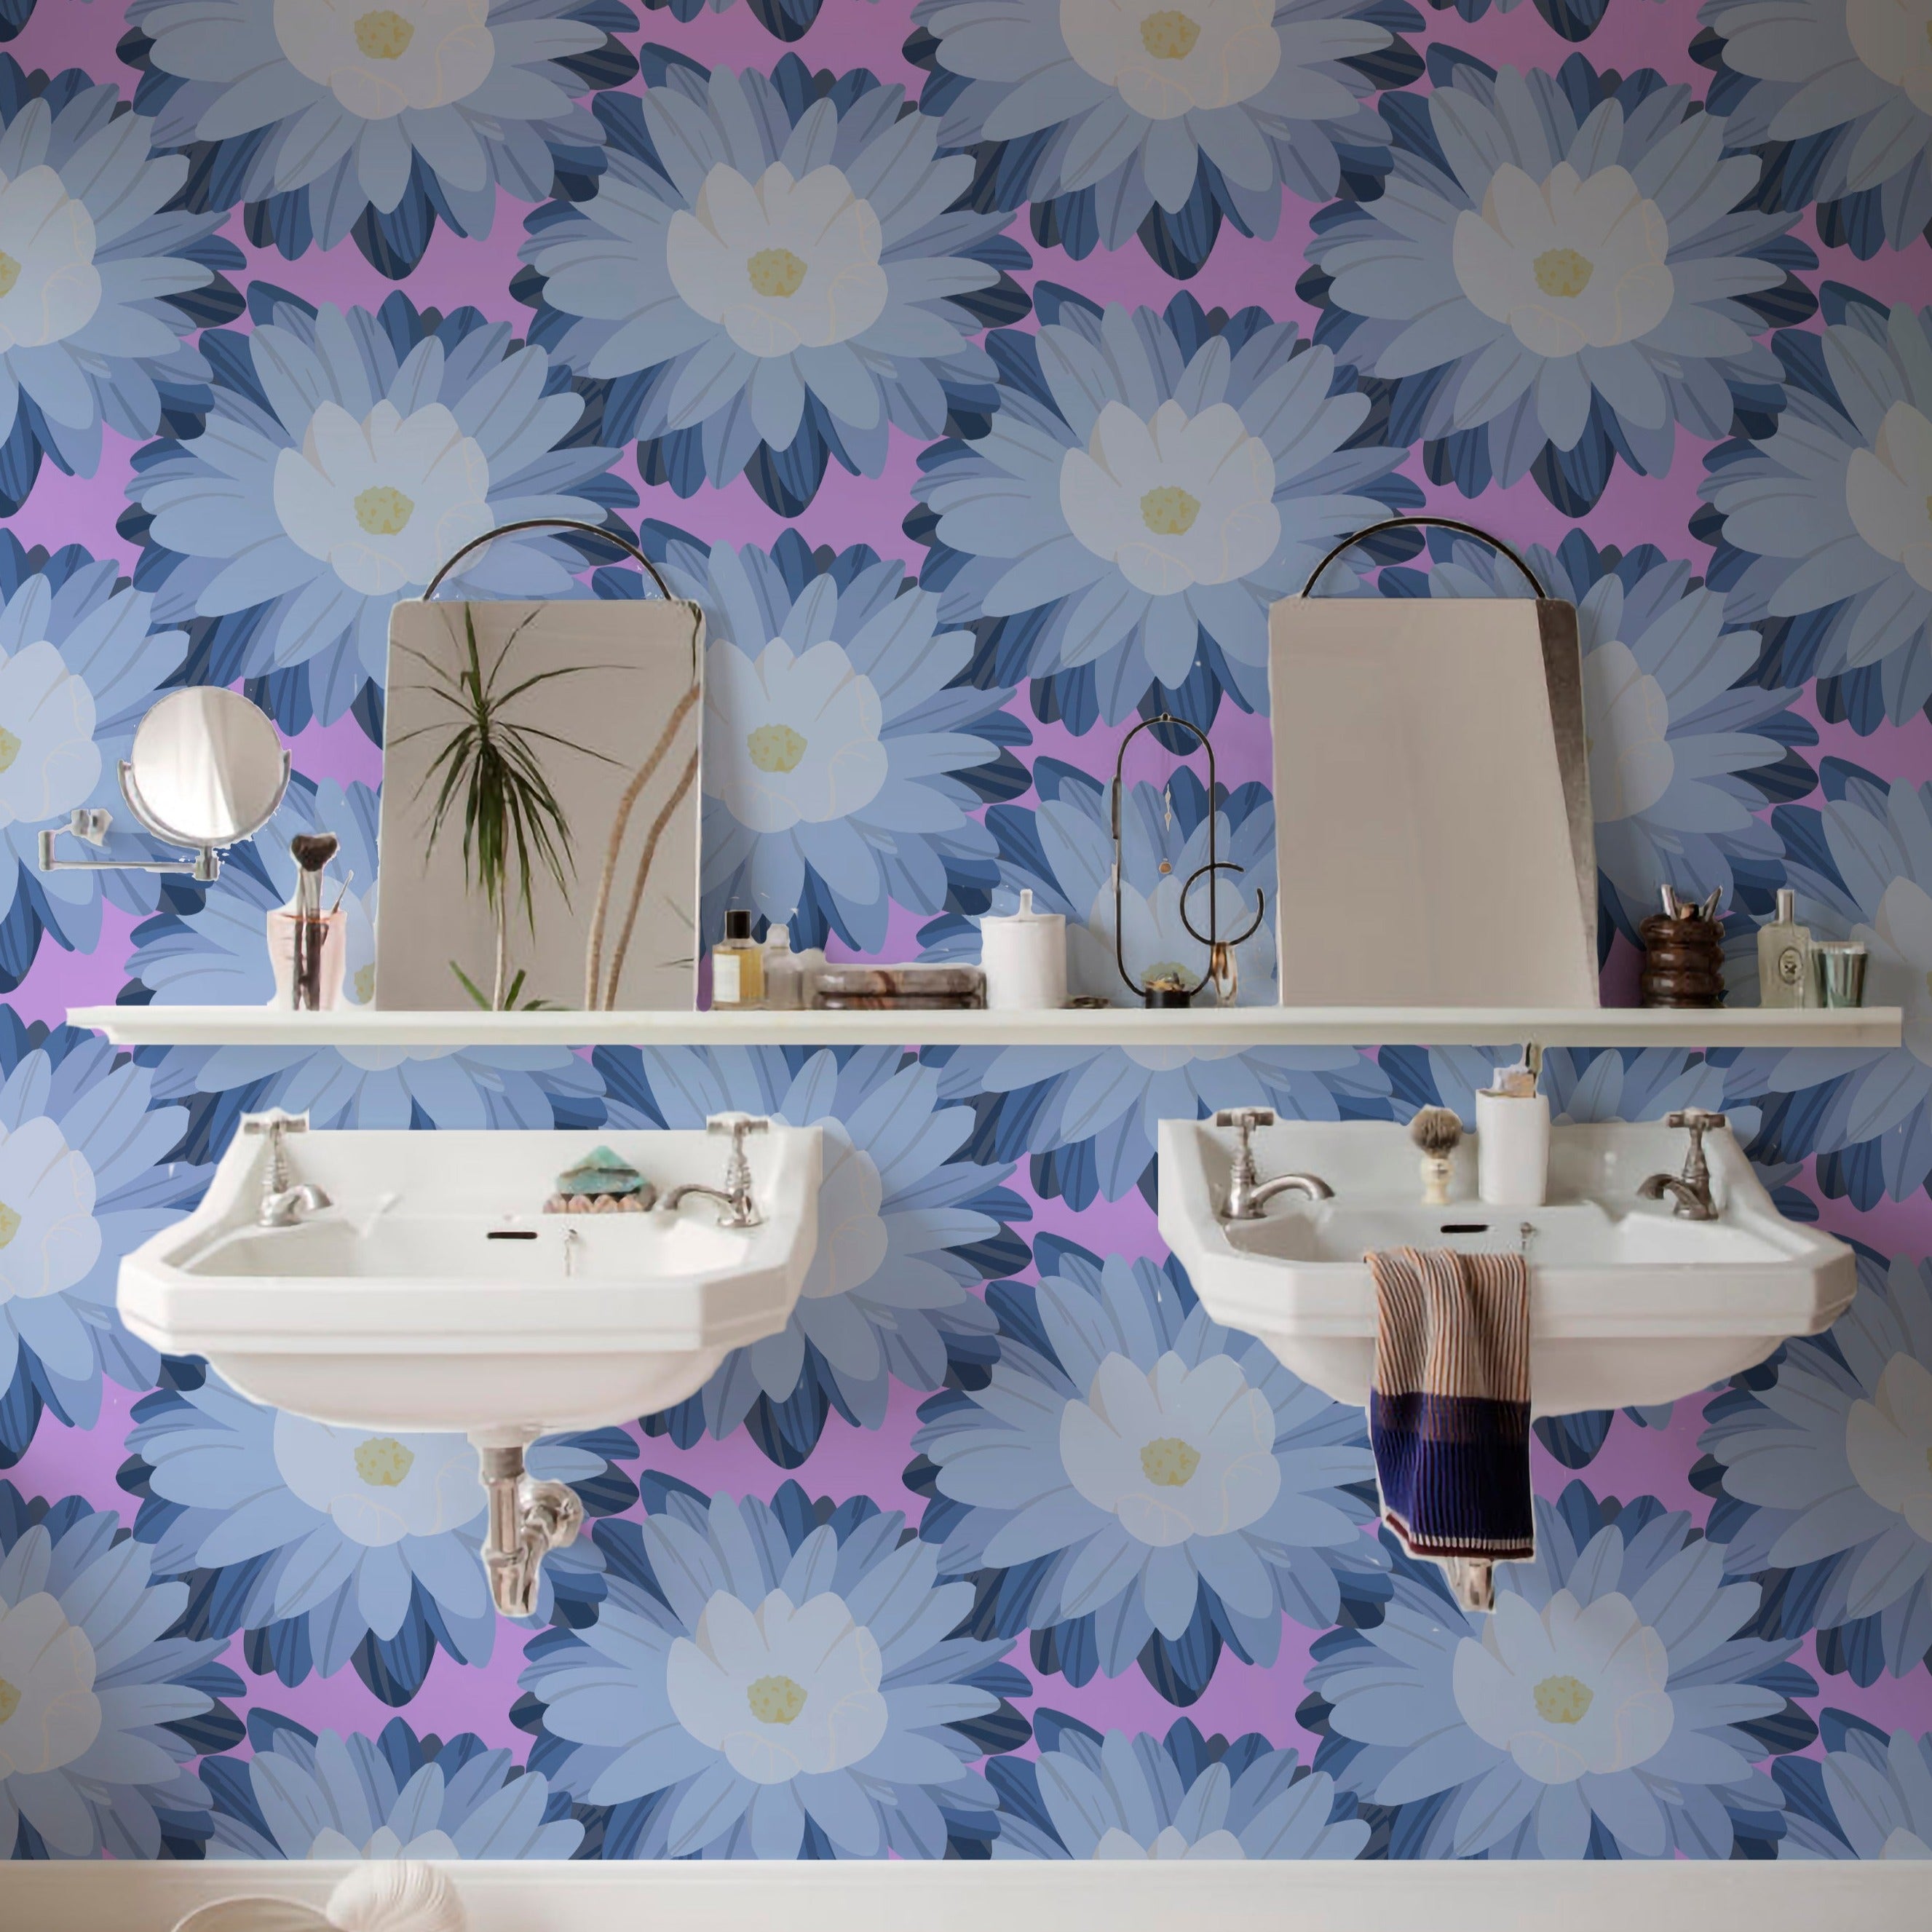 Elegant bathroom interior with pastel floral wallpaper featuring large blue and pink flowers